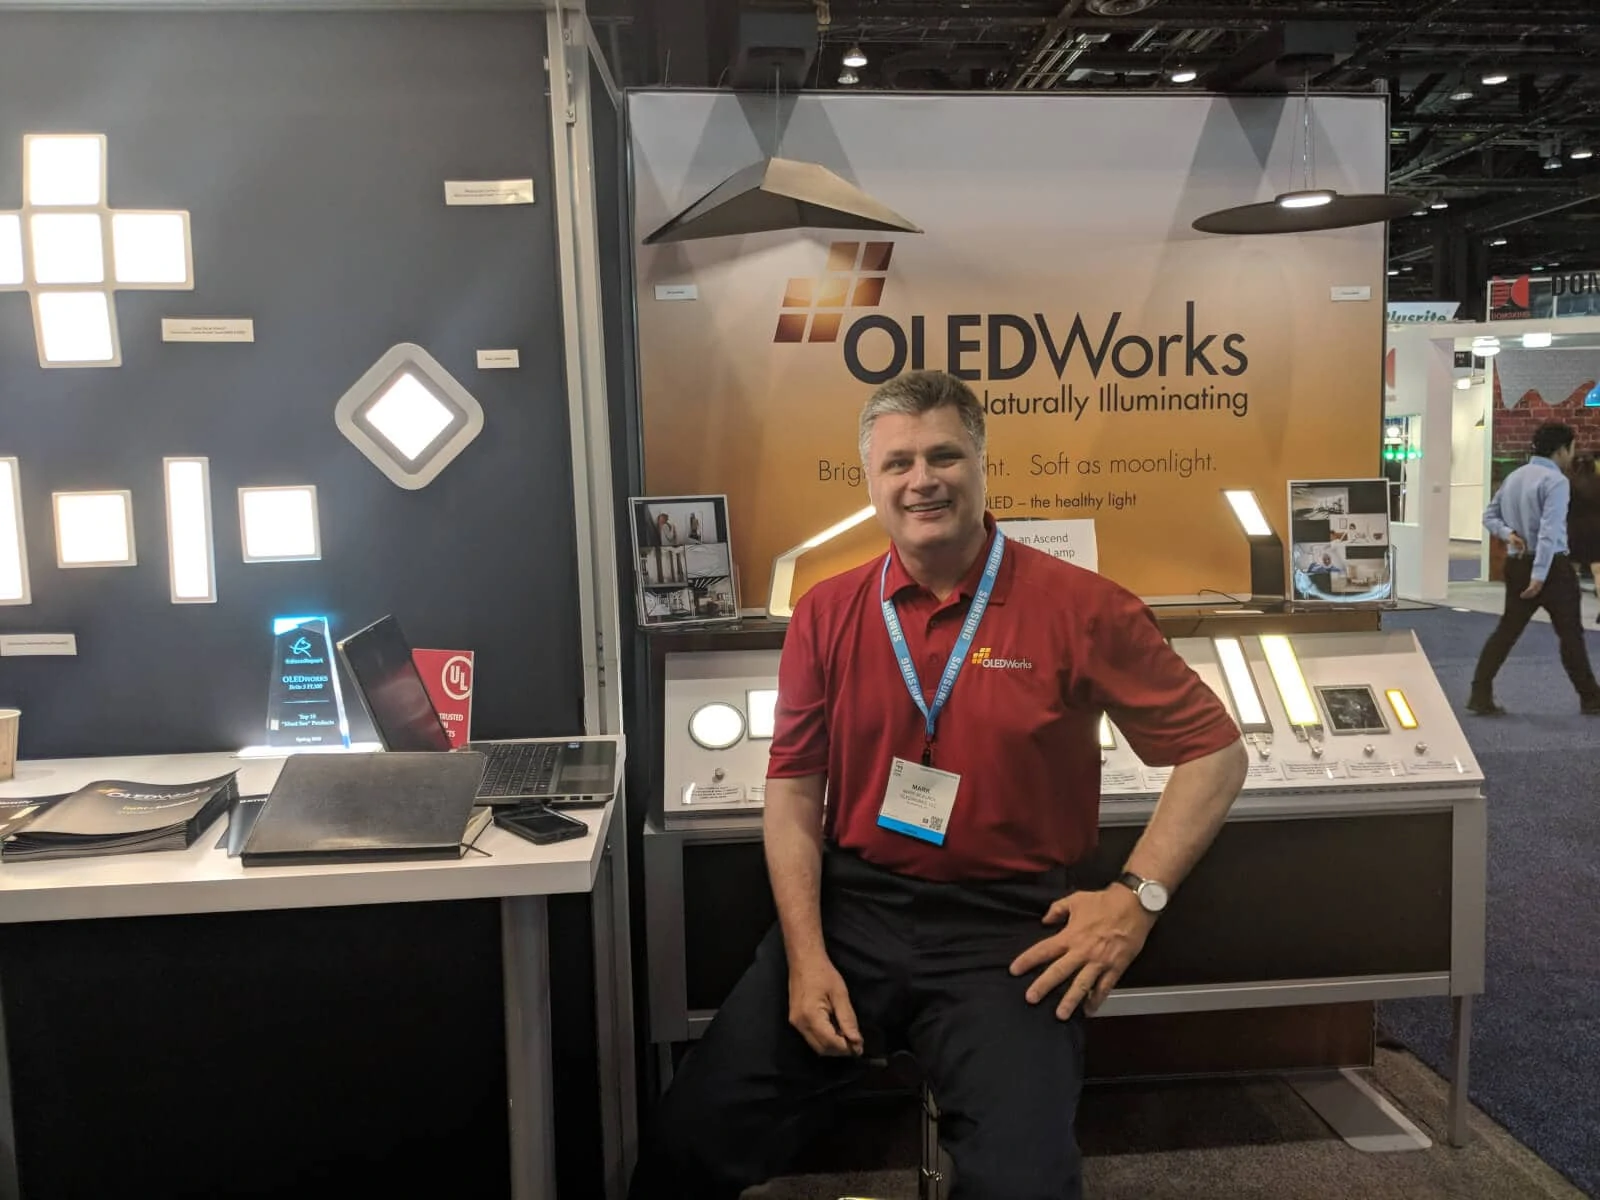 National Accounts Manager Mark McElroy at OLEDWorks booth at Lightfair 2018